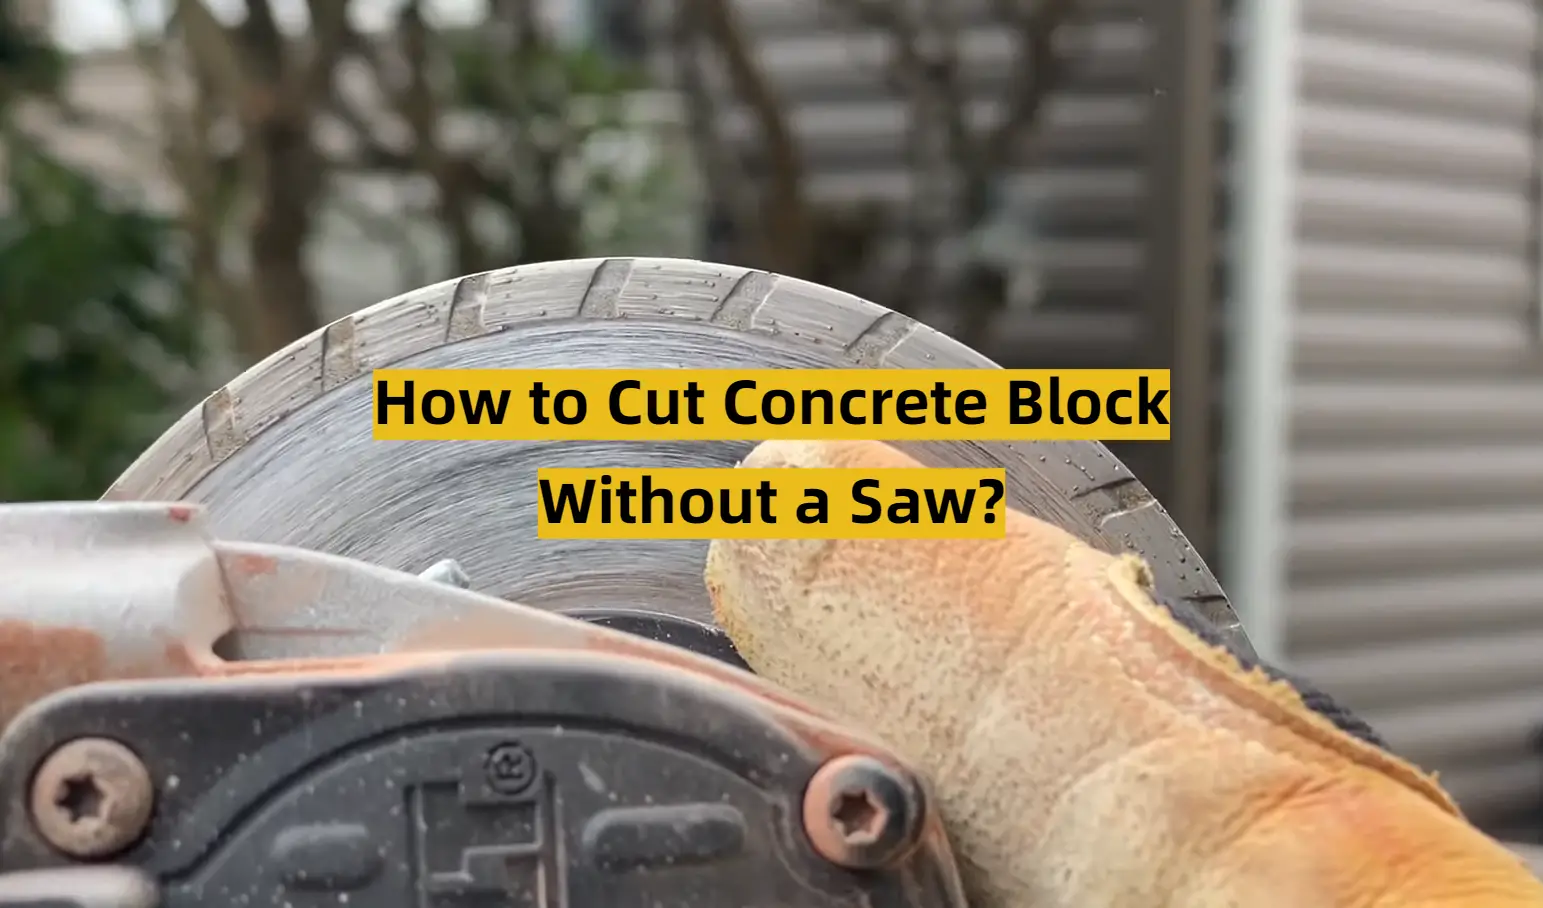 How to Cut Concrete Block Without a Saw?